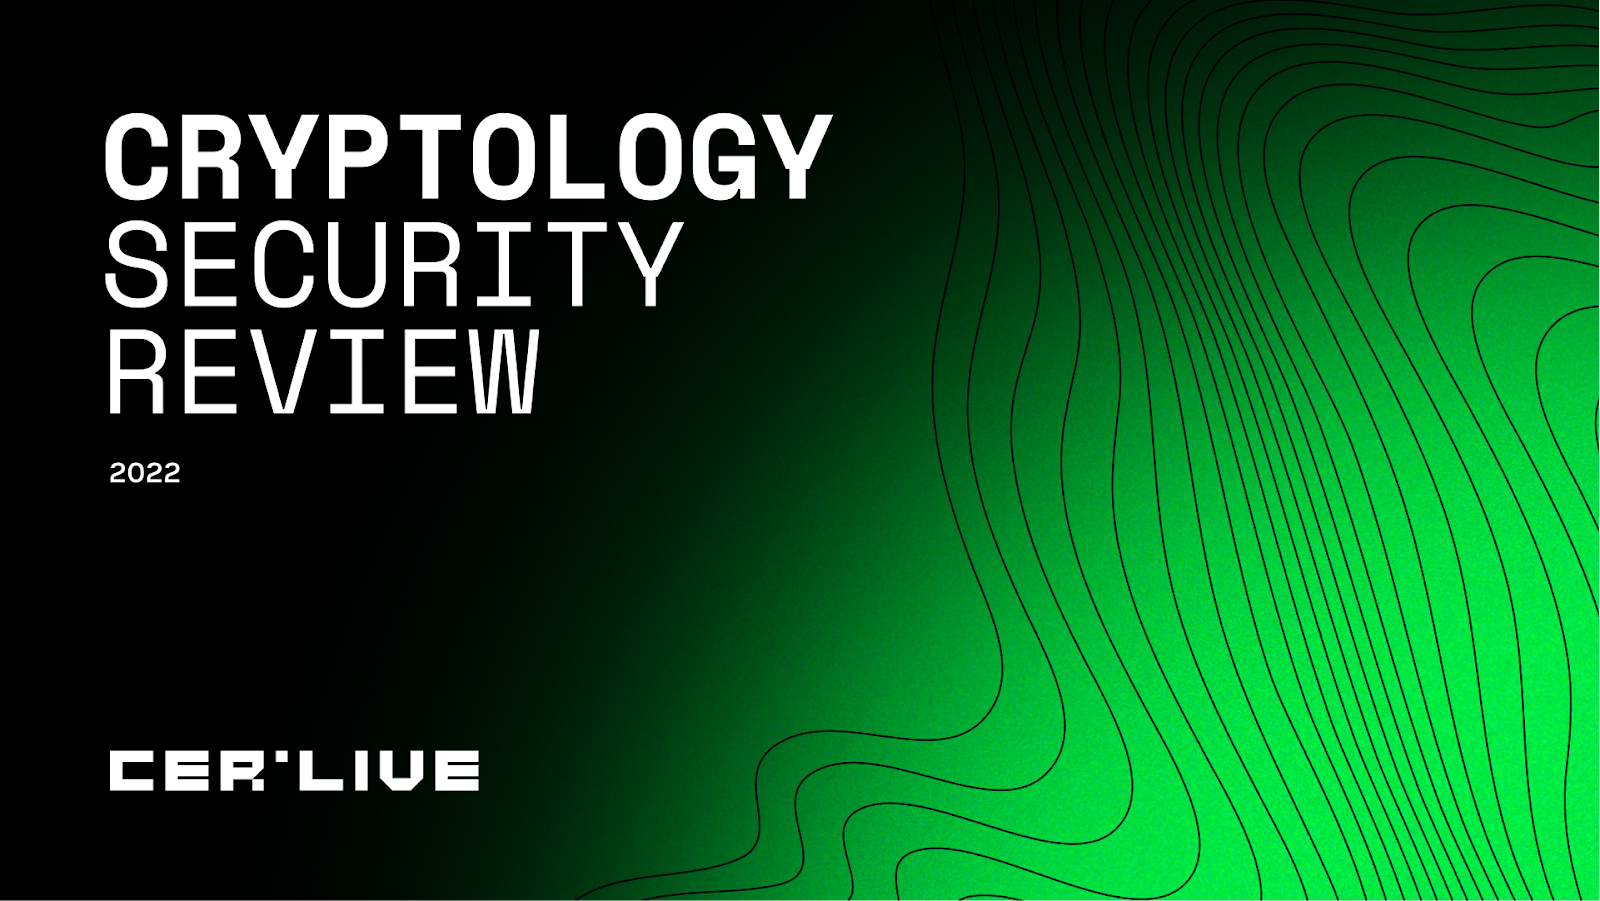 Cryptology Security Review 2022image